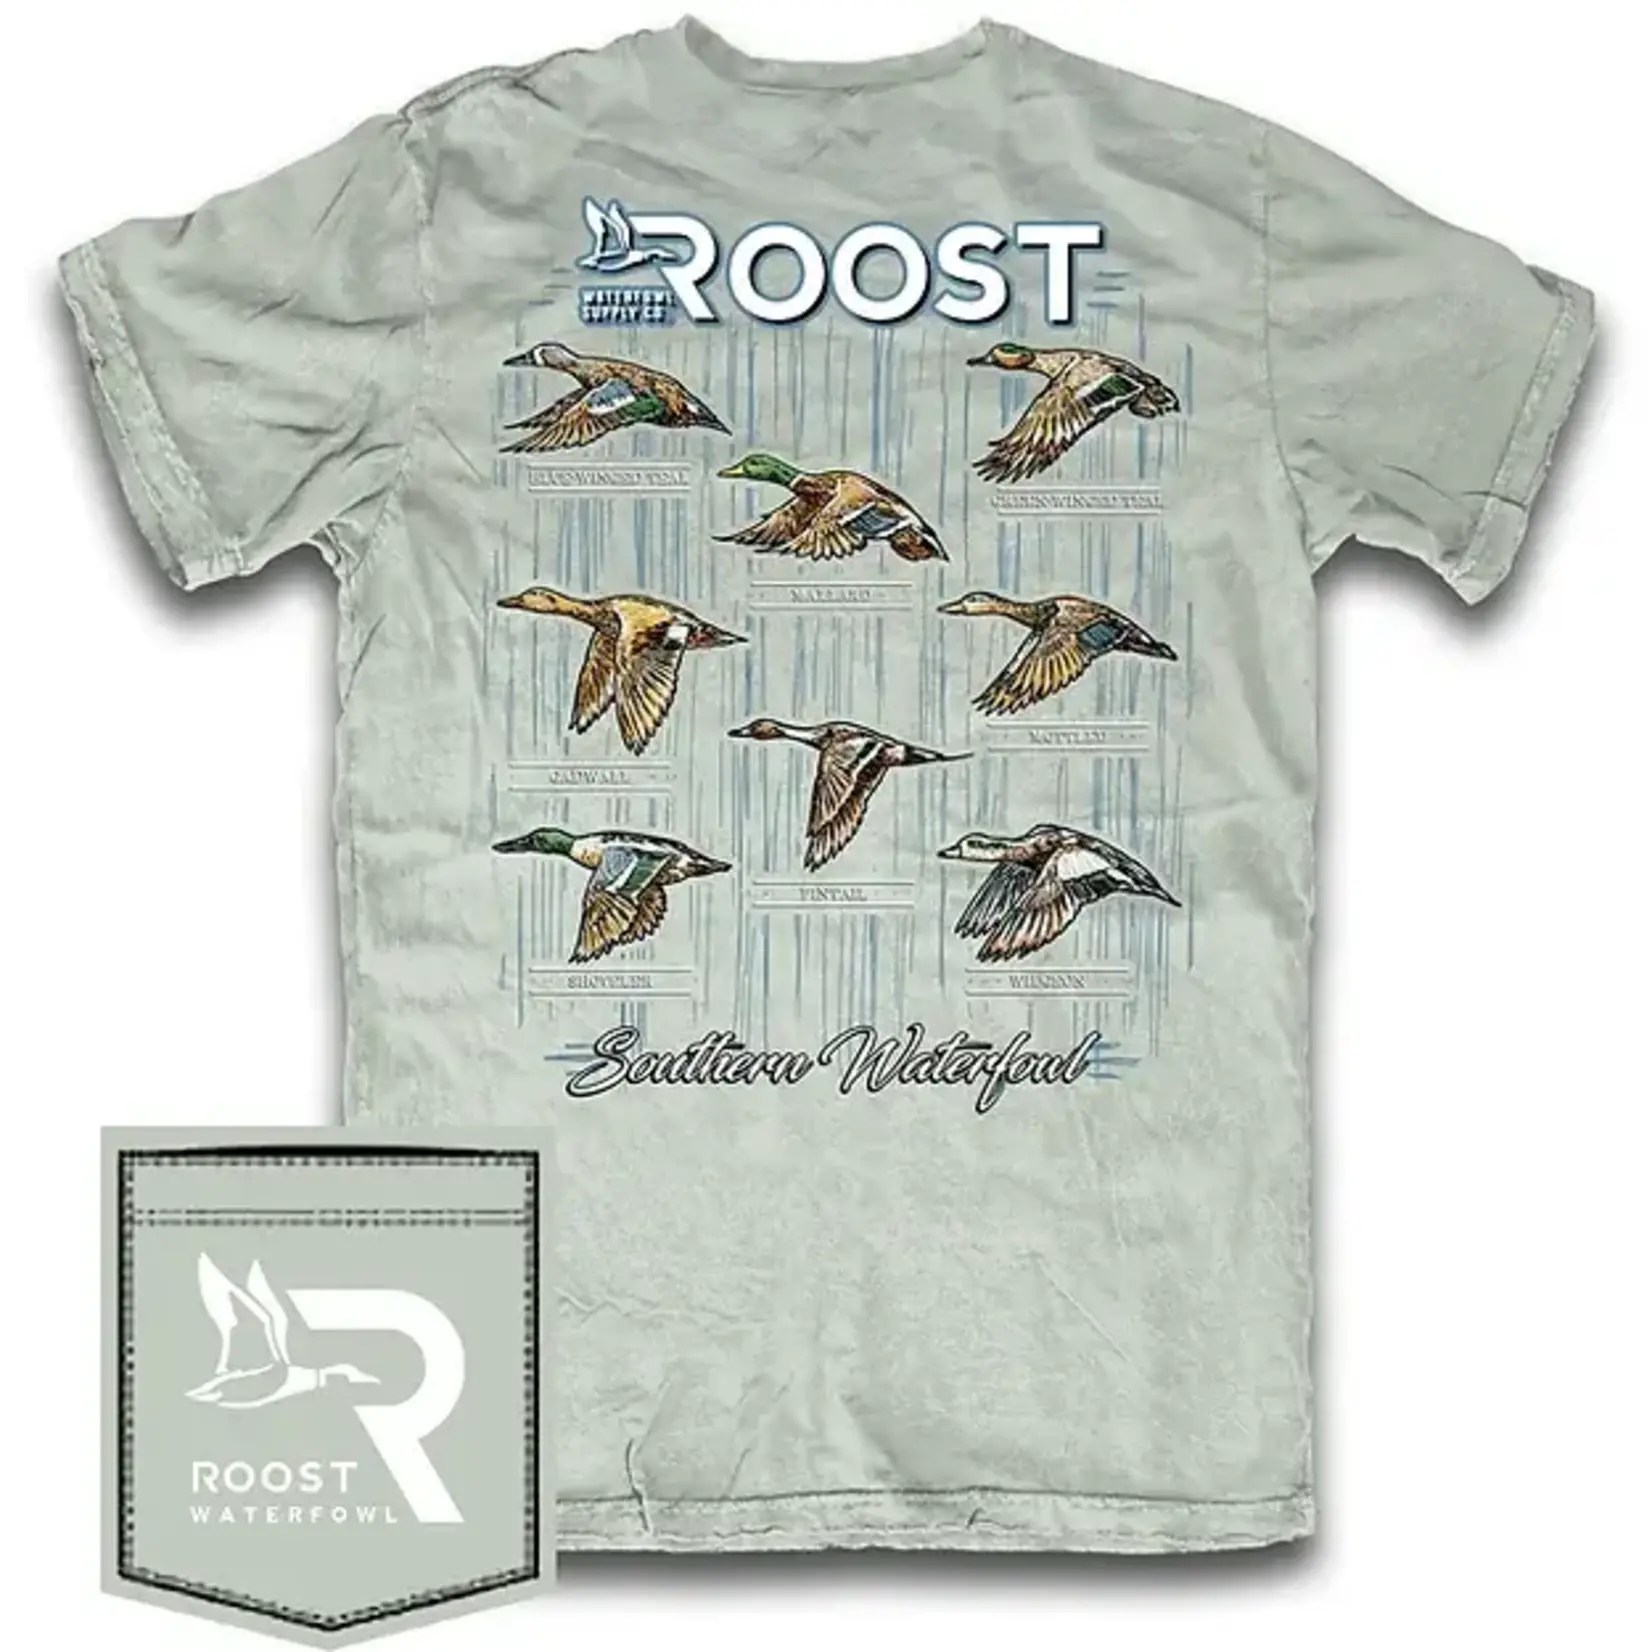 Roost Waterfowl Roost Waterfowl Youth Southern Waterfowl S/S TEE Shirt